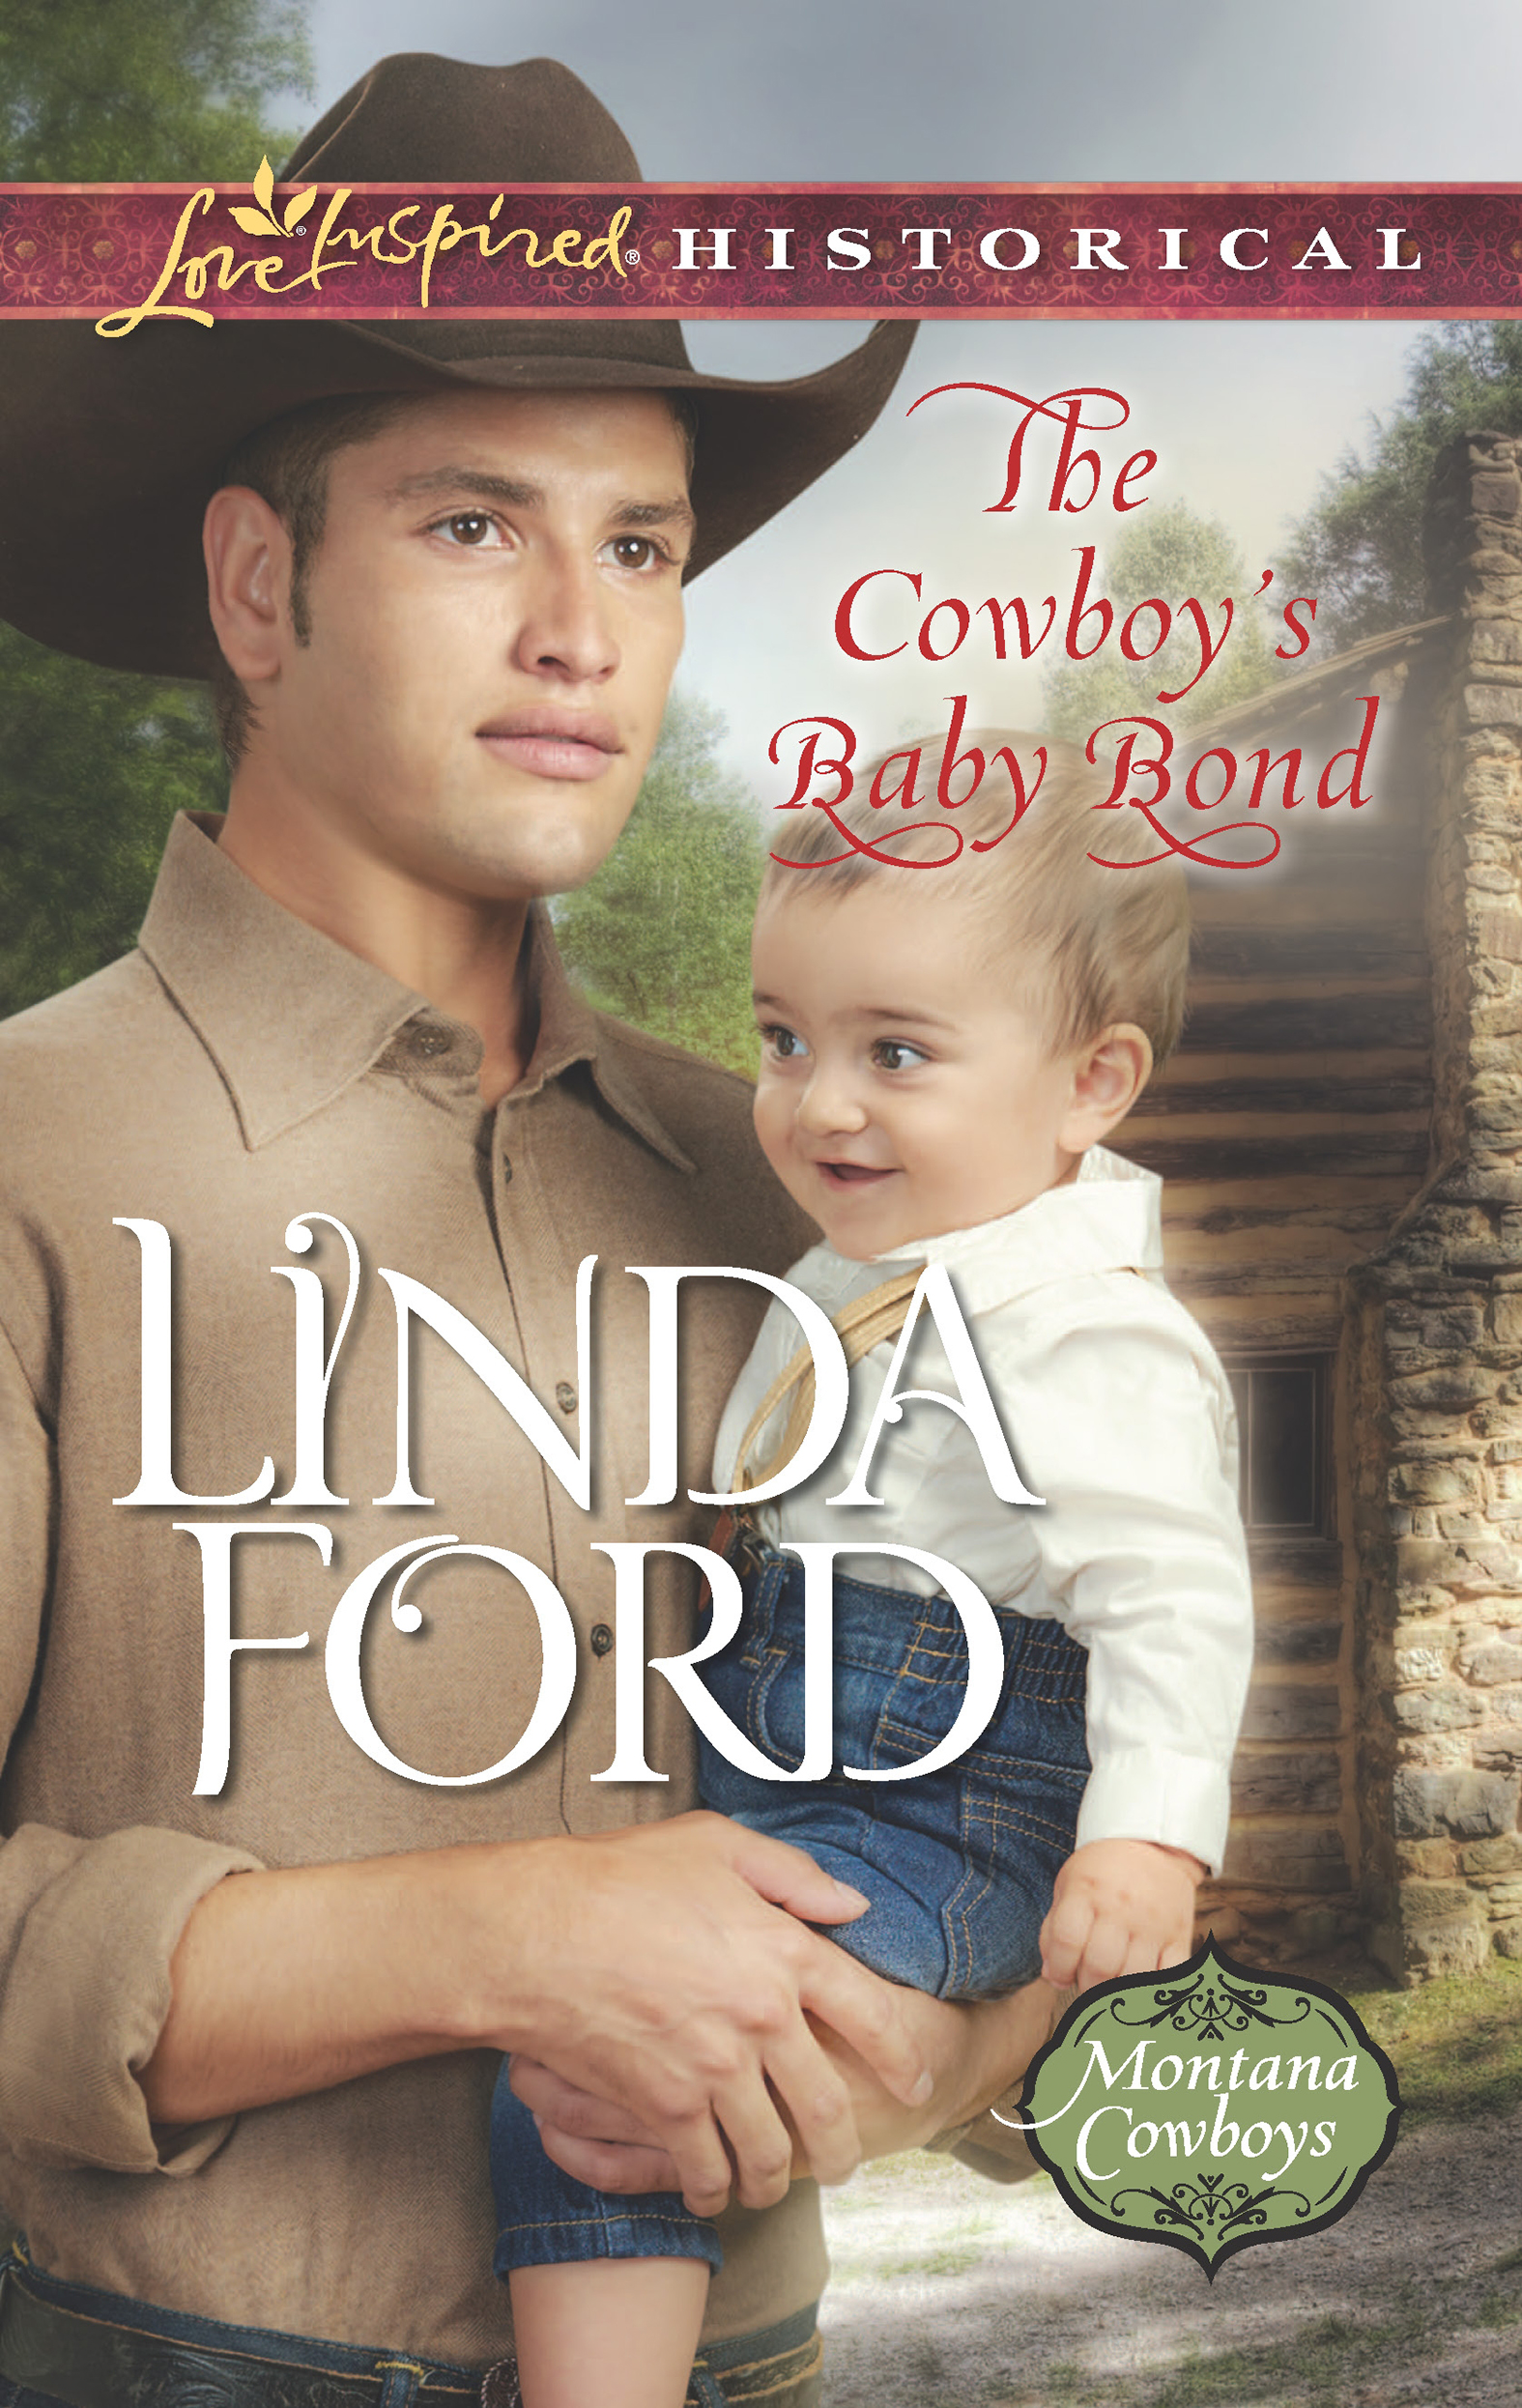 The Cowboy's Baby Bond (2016) by Linda Ford